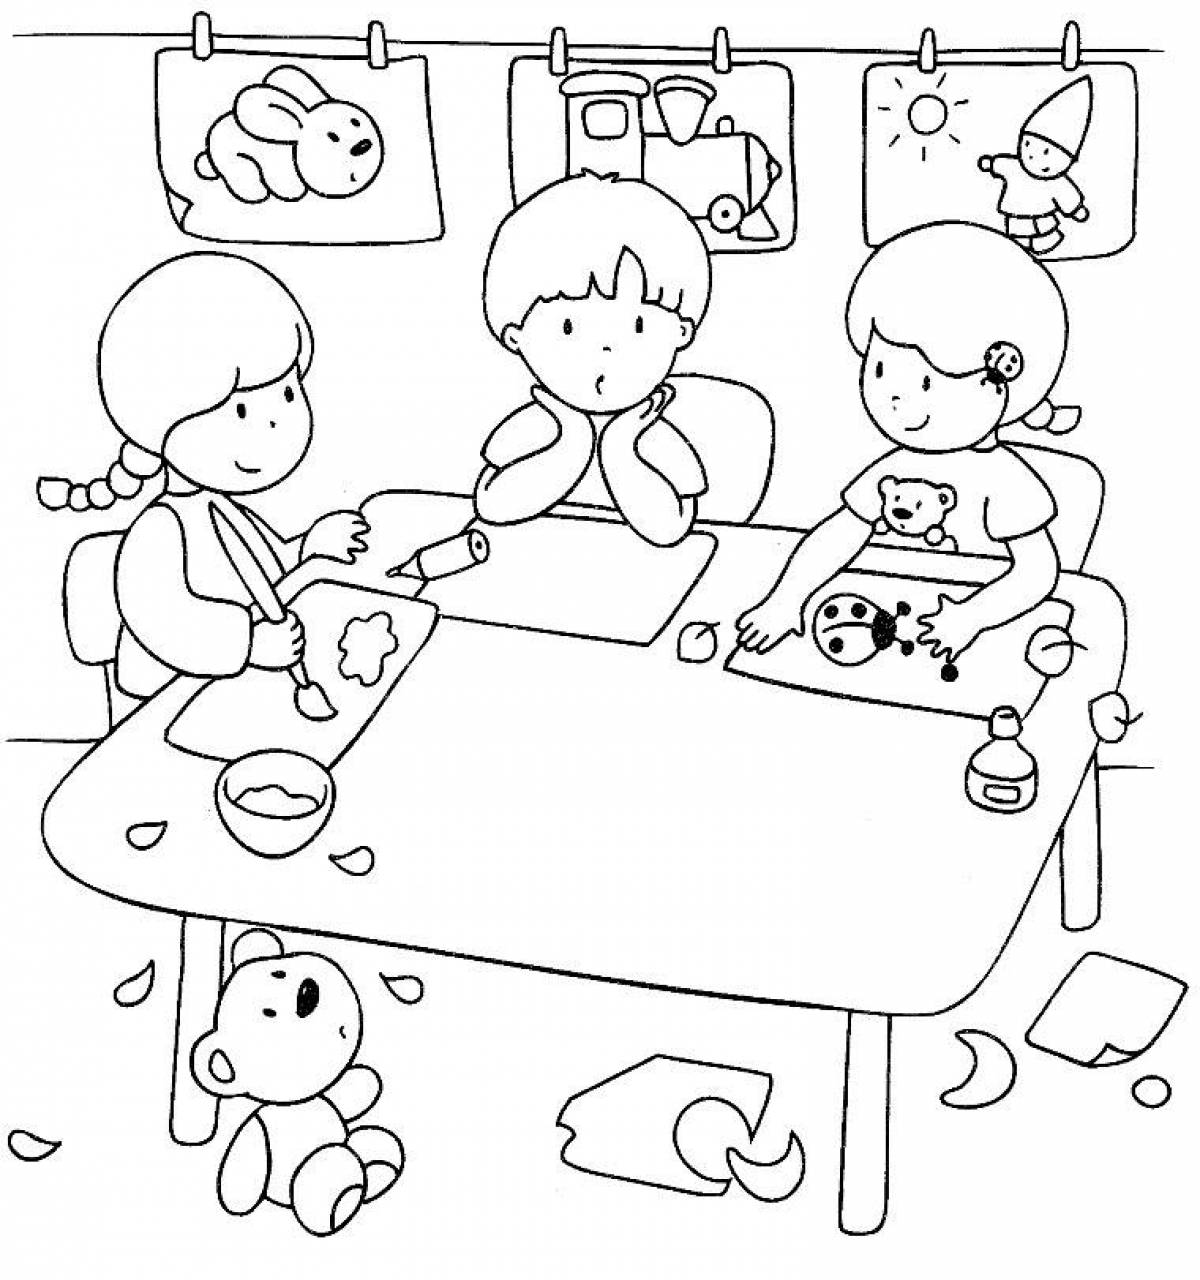 Colorful exciting coloring book kindergarten